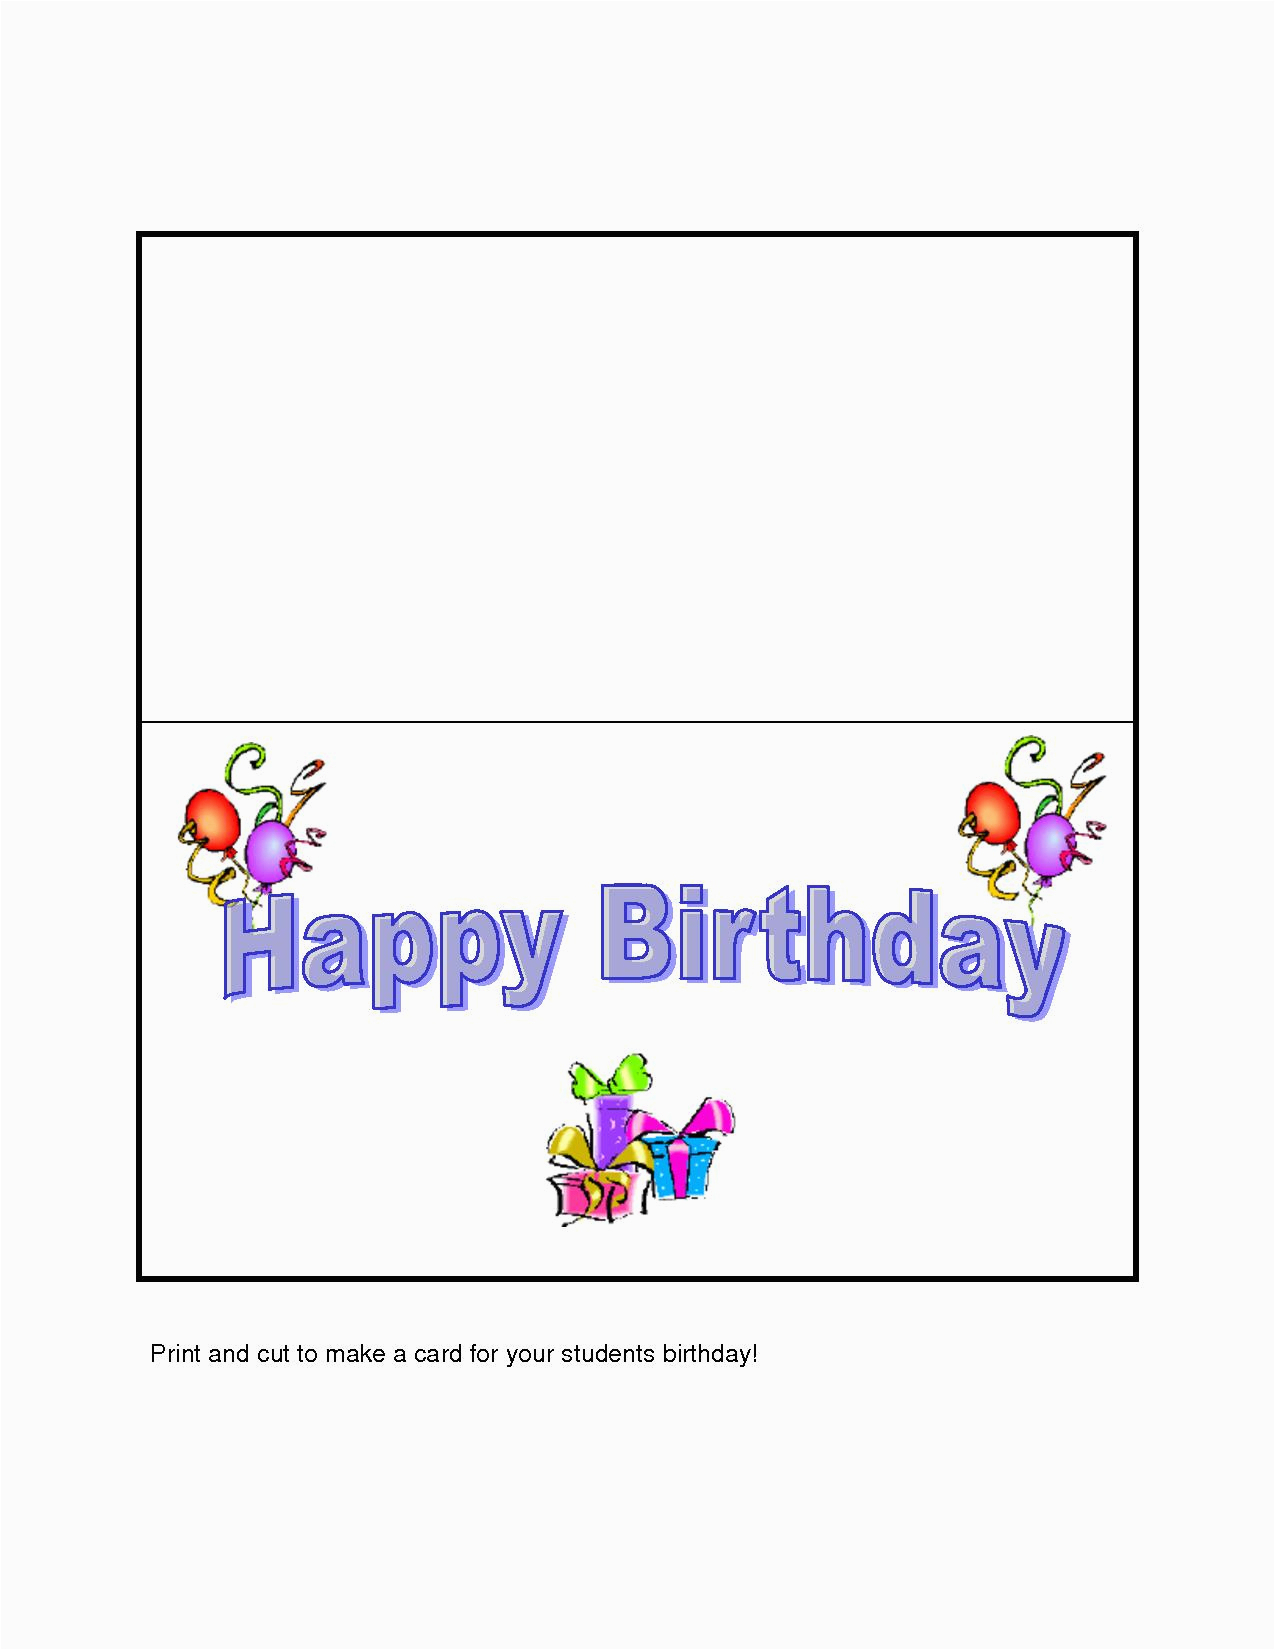 Make Your Own Birthday Cards Free And Print | Birthdaybuzz - Customized Birthday Cards Free Printable